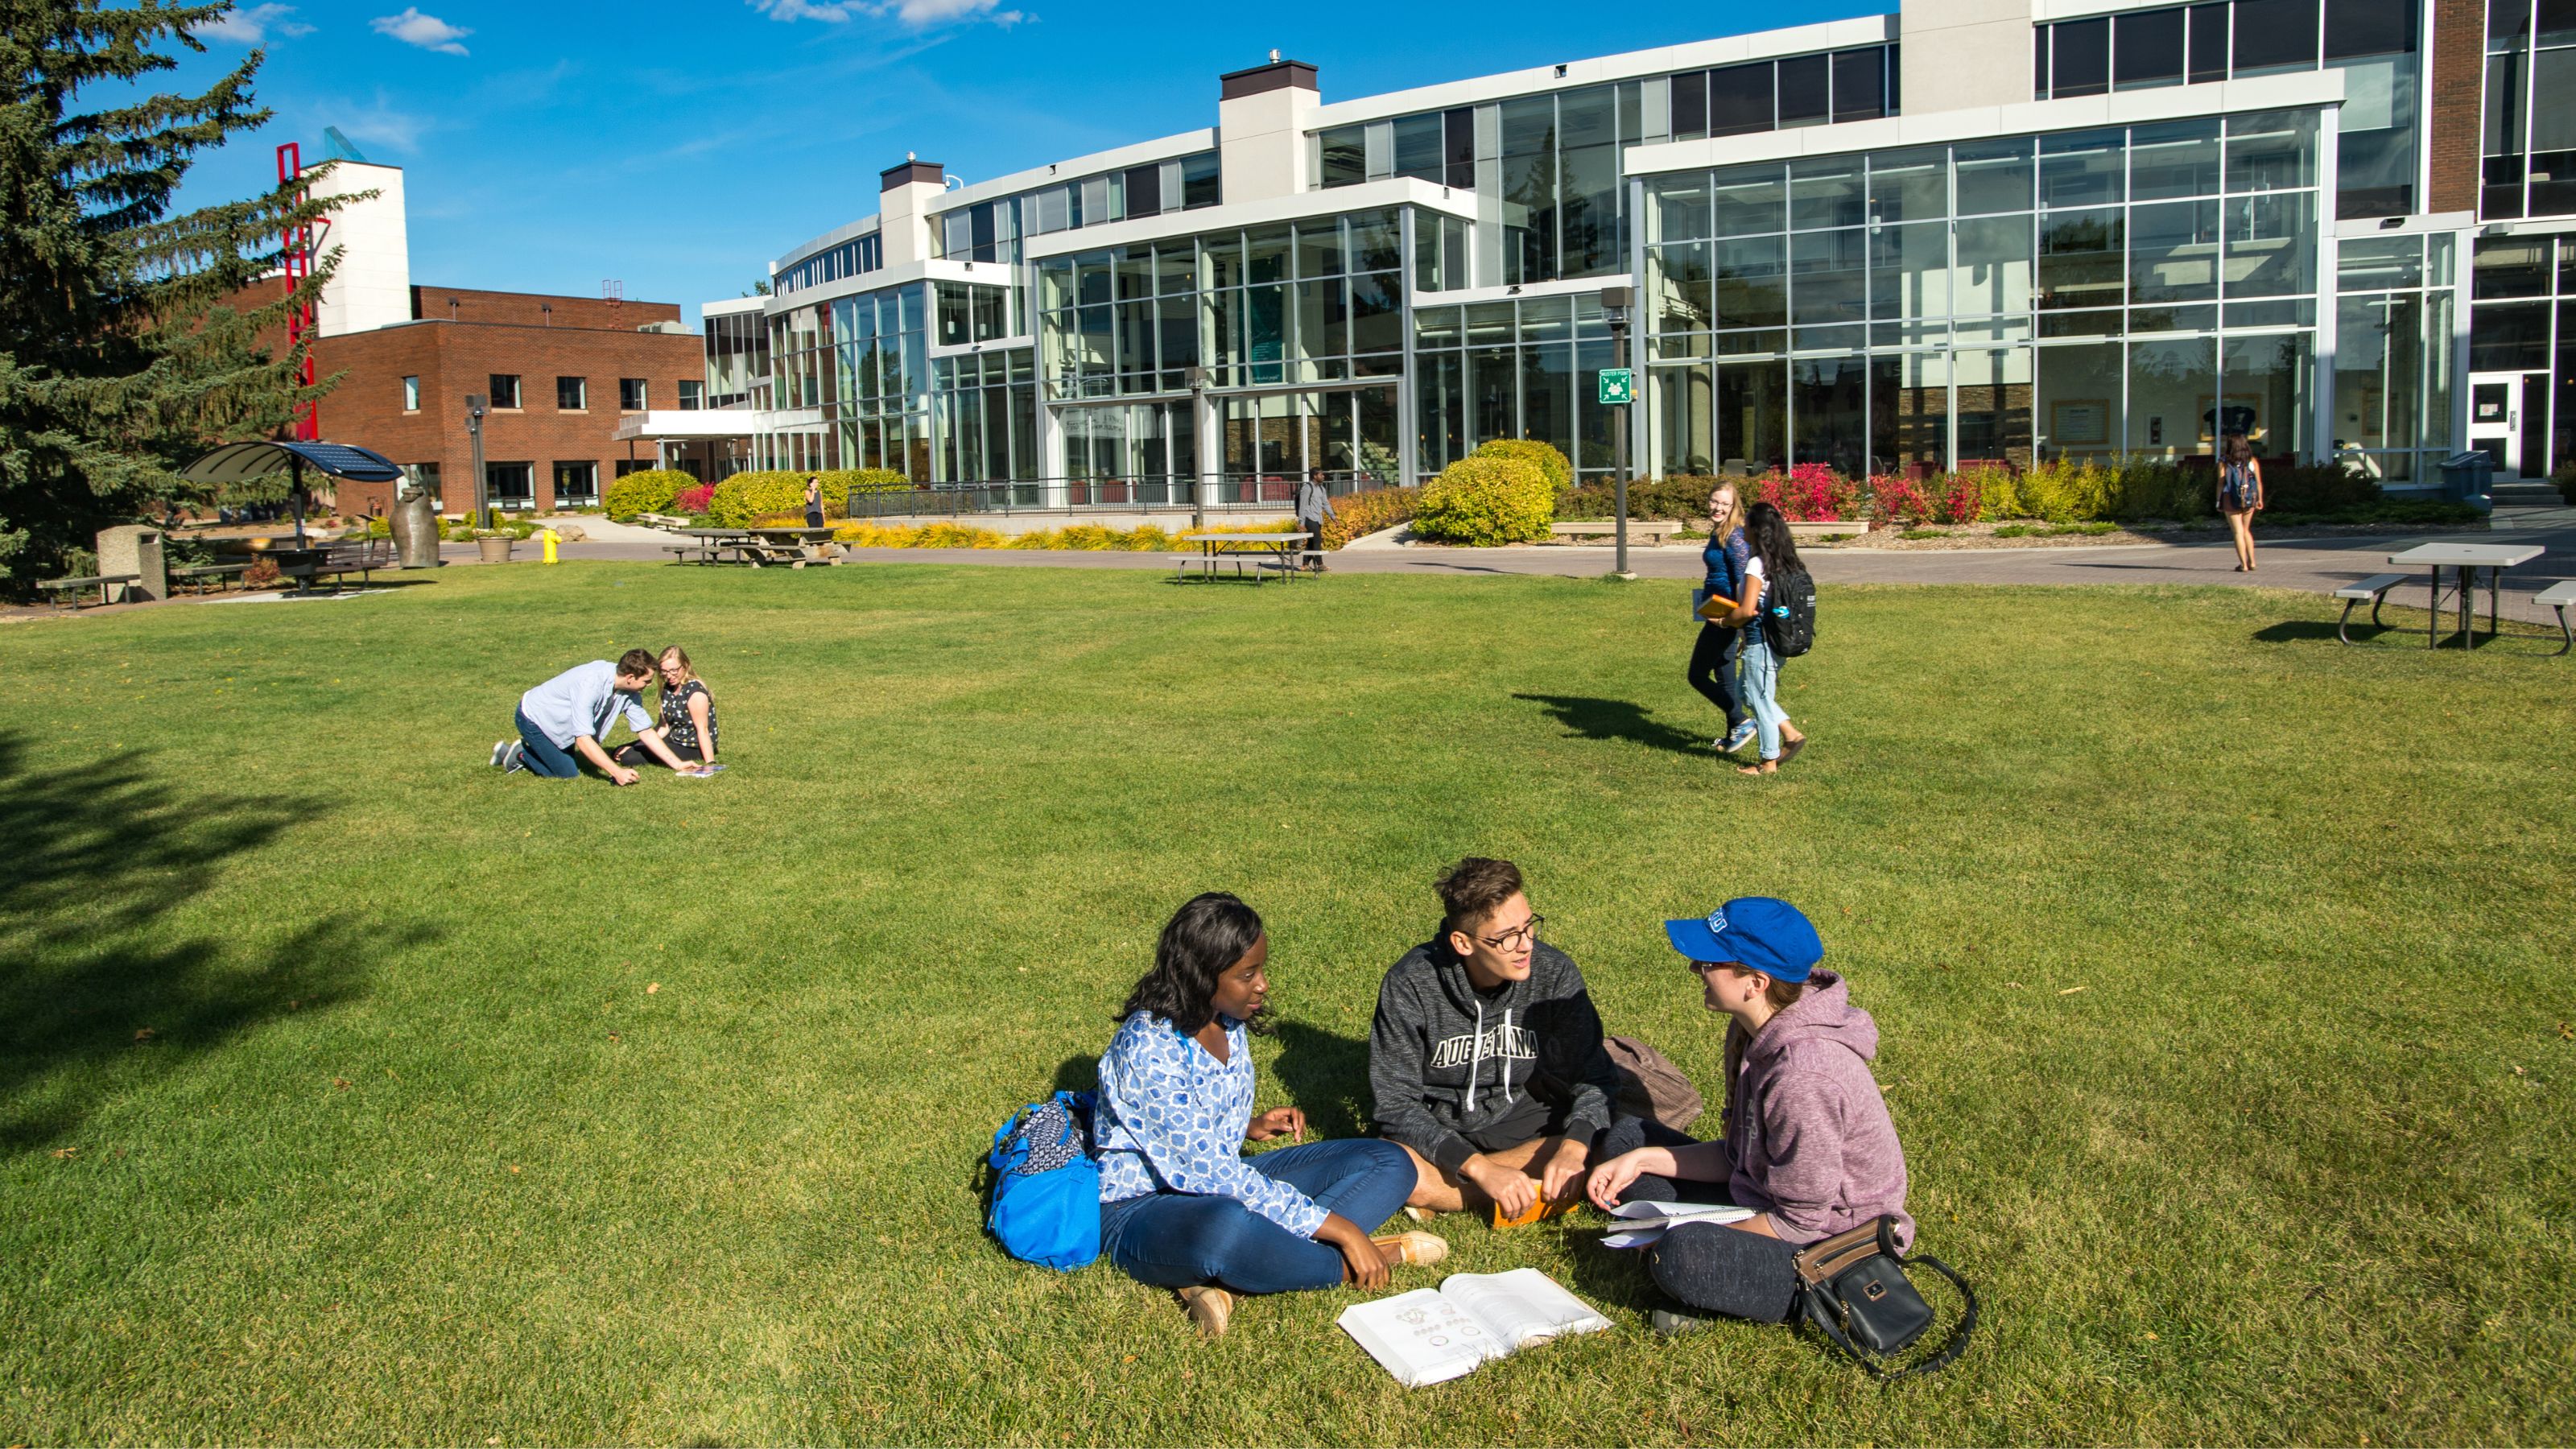 Students sitting outside in the grass at the University of Alberta Augustana Campus